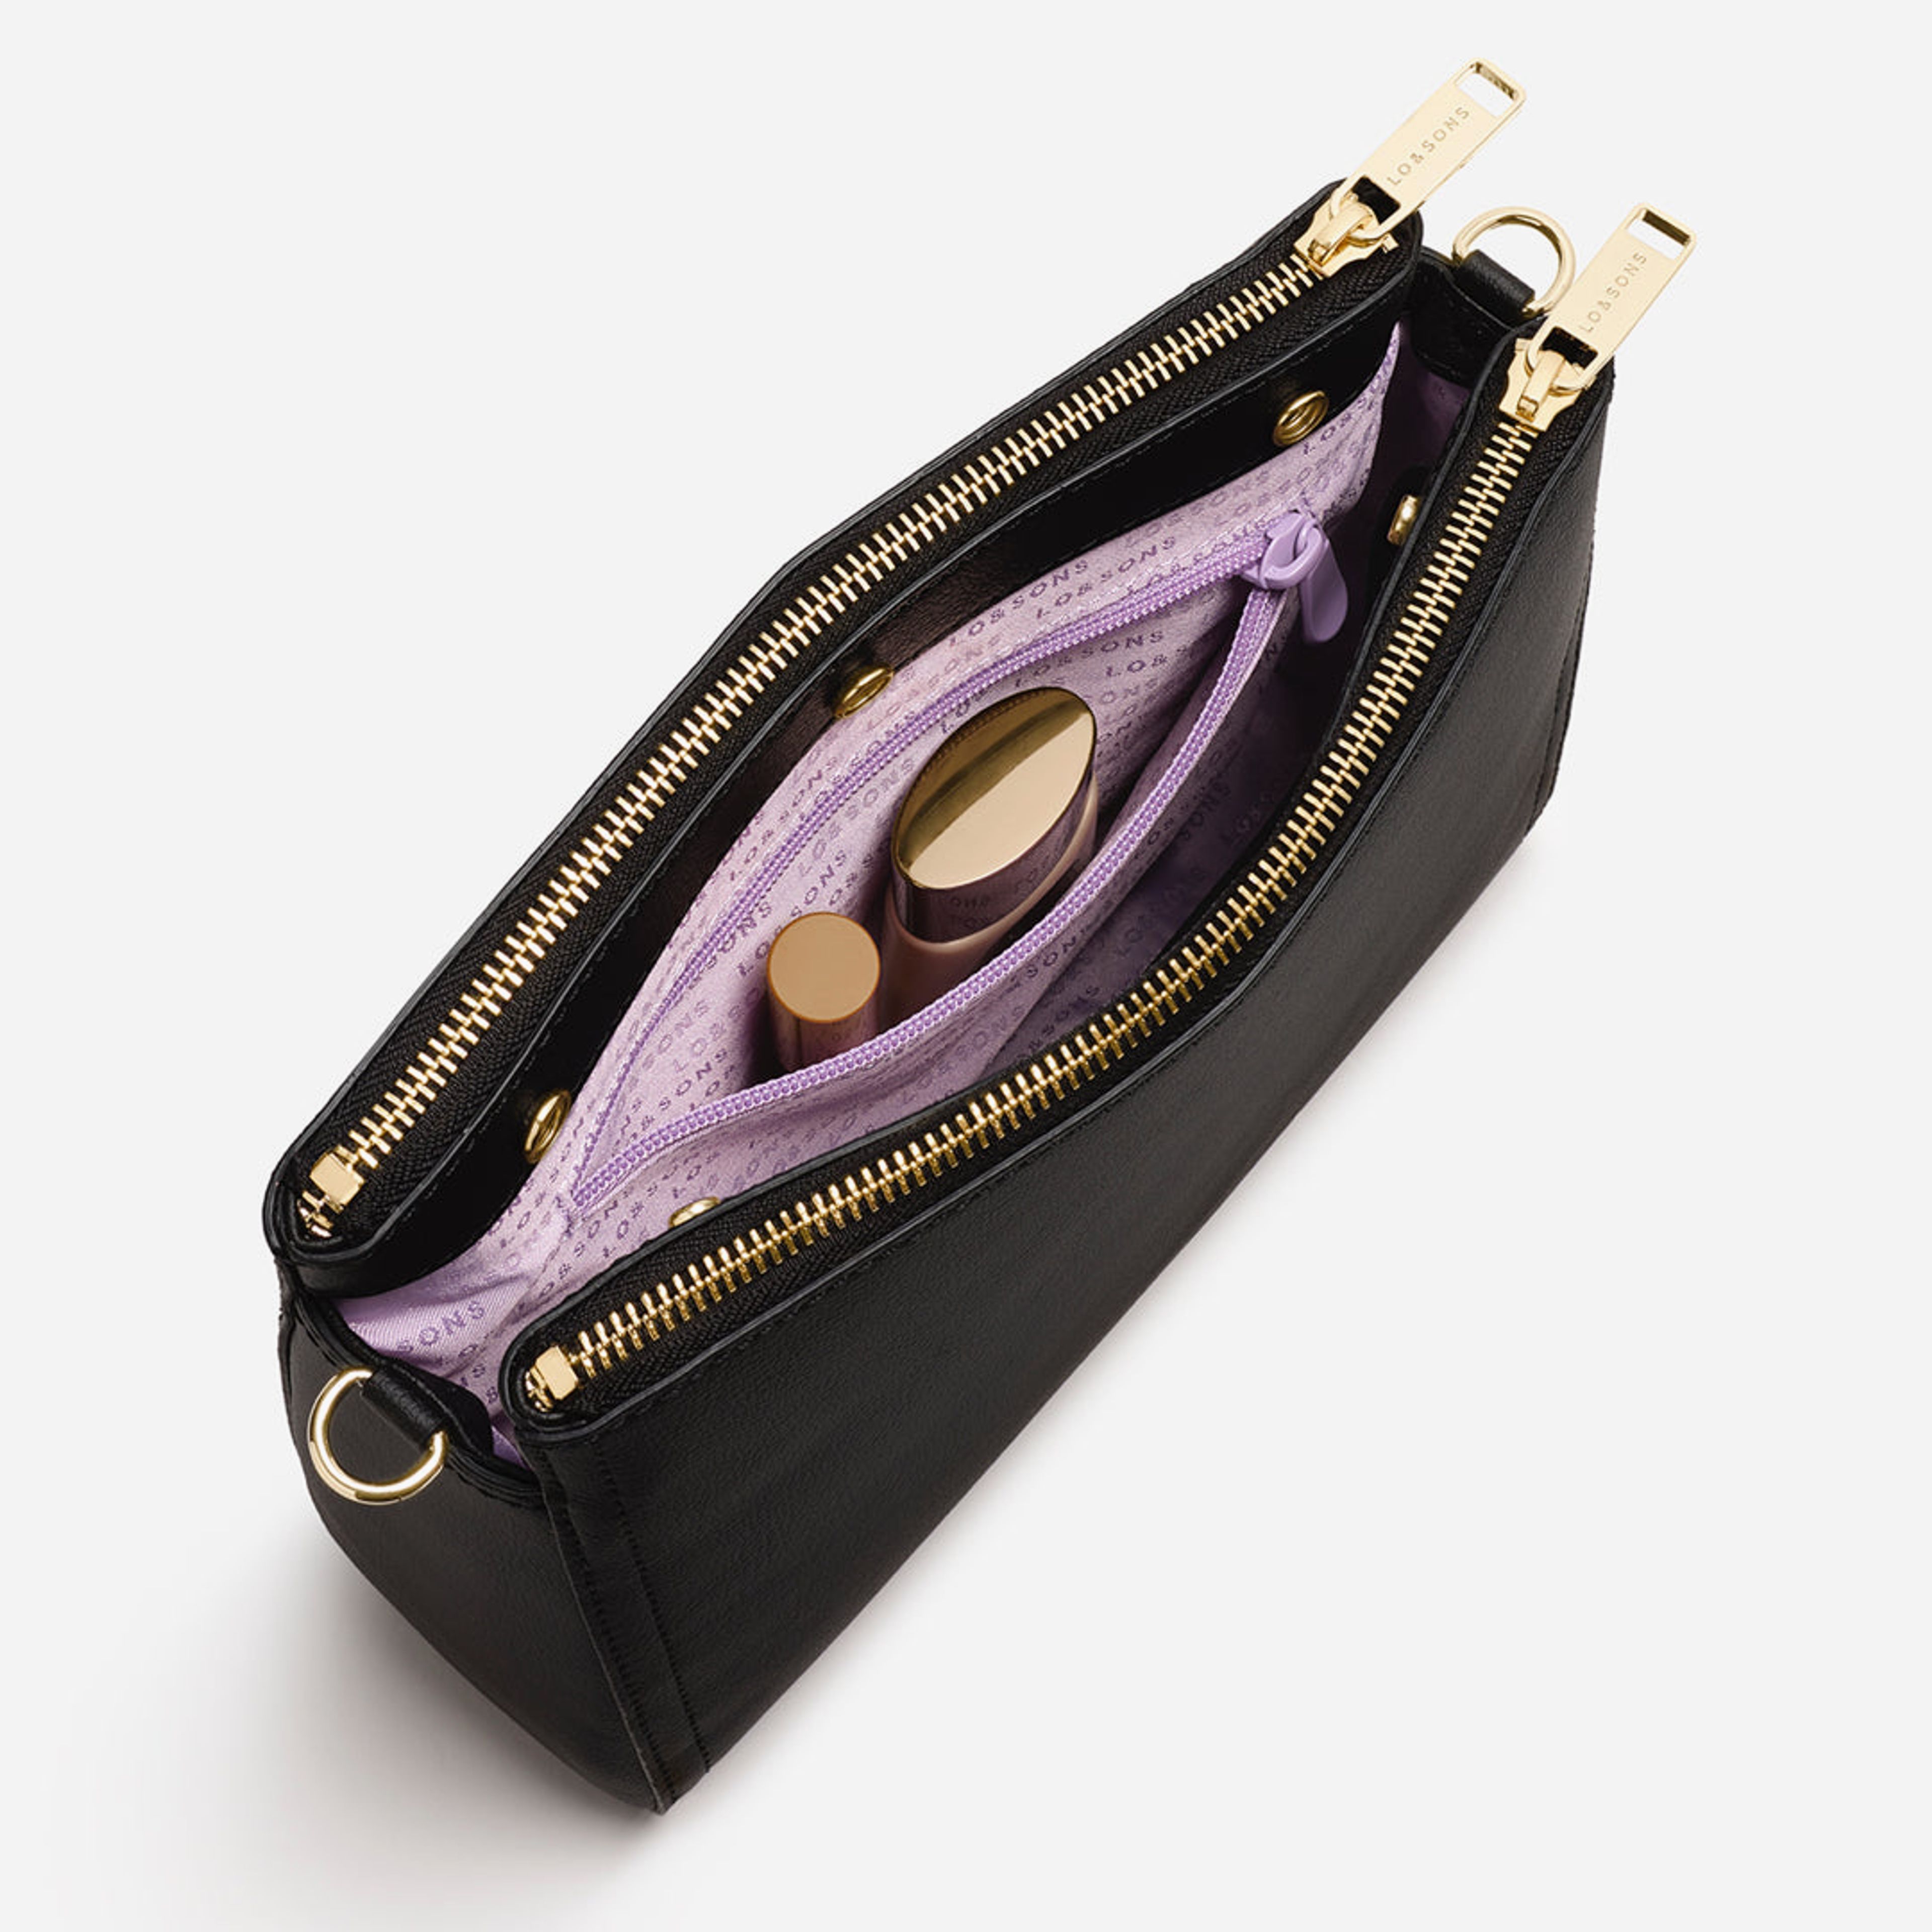 The Pearl - Cactus Leather - Black / Gold / Lavender